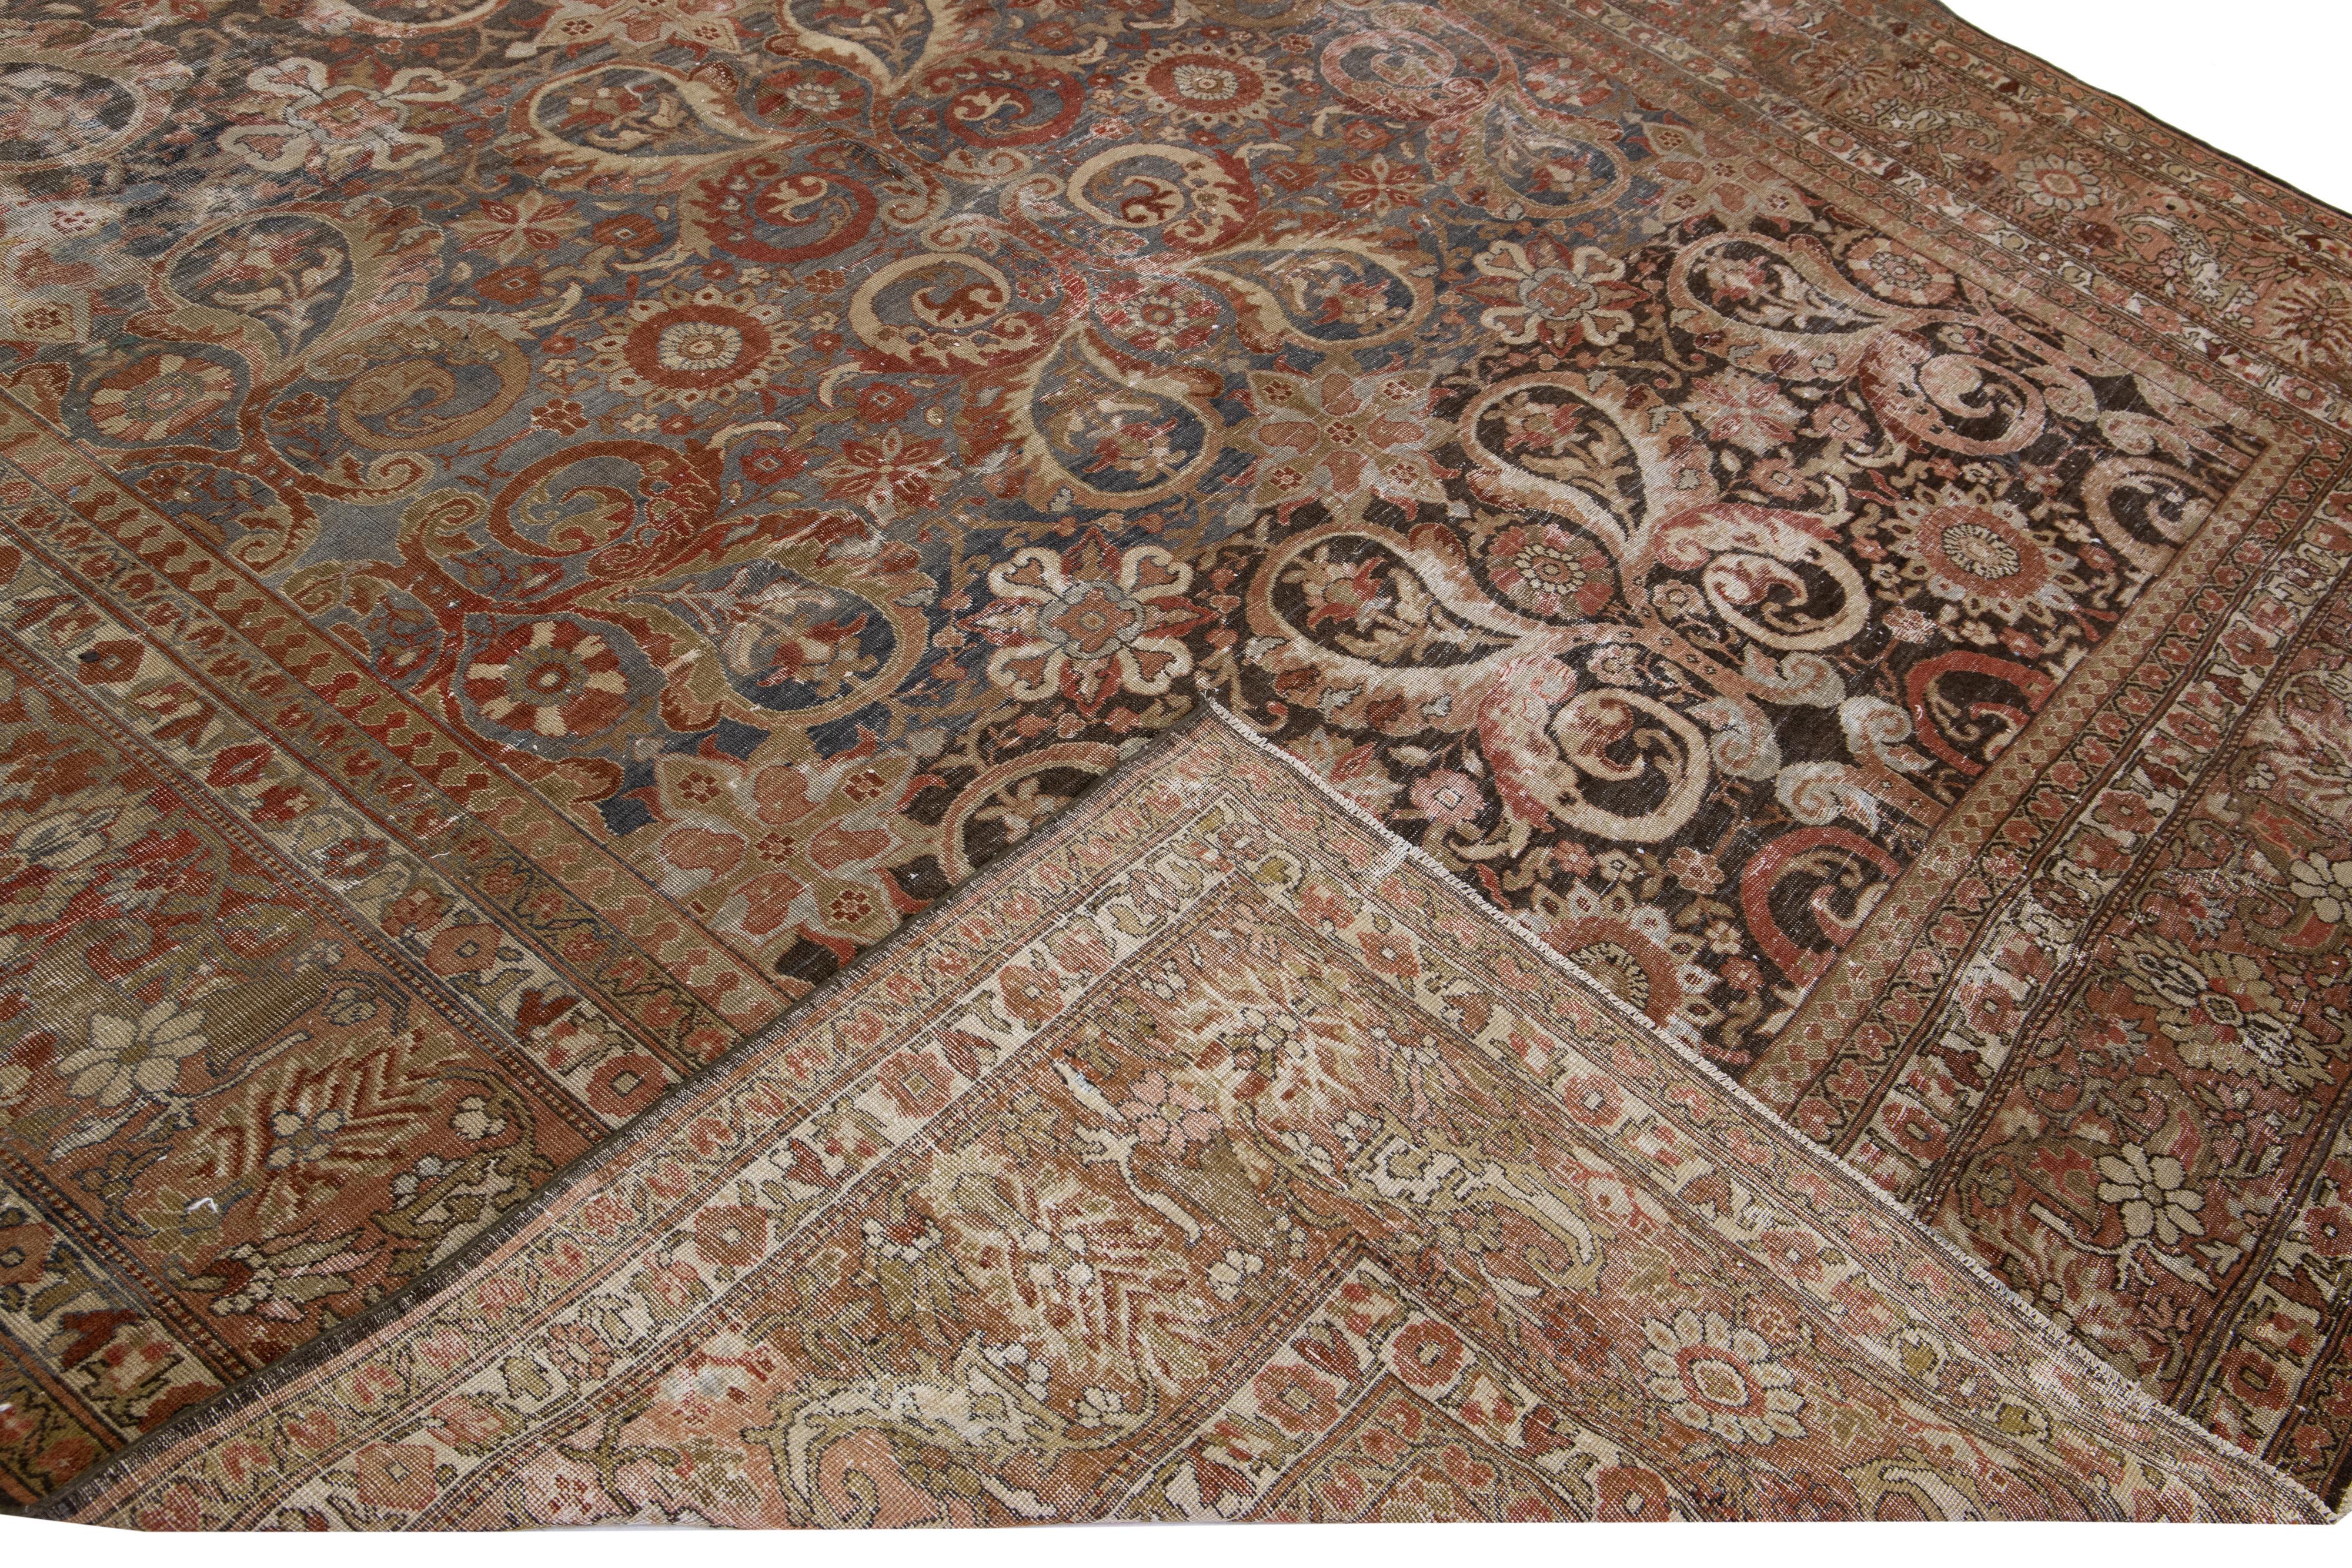 Beautiful antique Tabriz hand-knotted wool rug with a gray and brown field. This Persian piece has a designed frame with an orange-rusted accent color in the traditional all-over design. 

This rug measures: 9'6